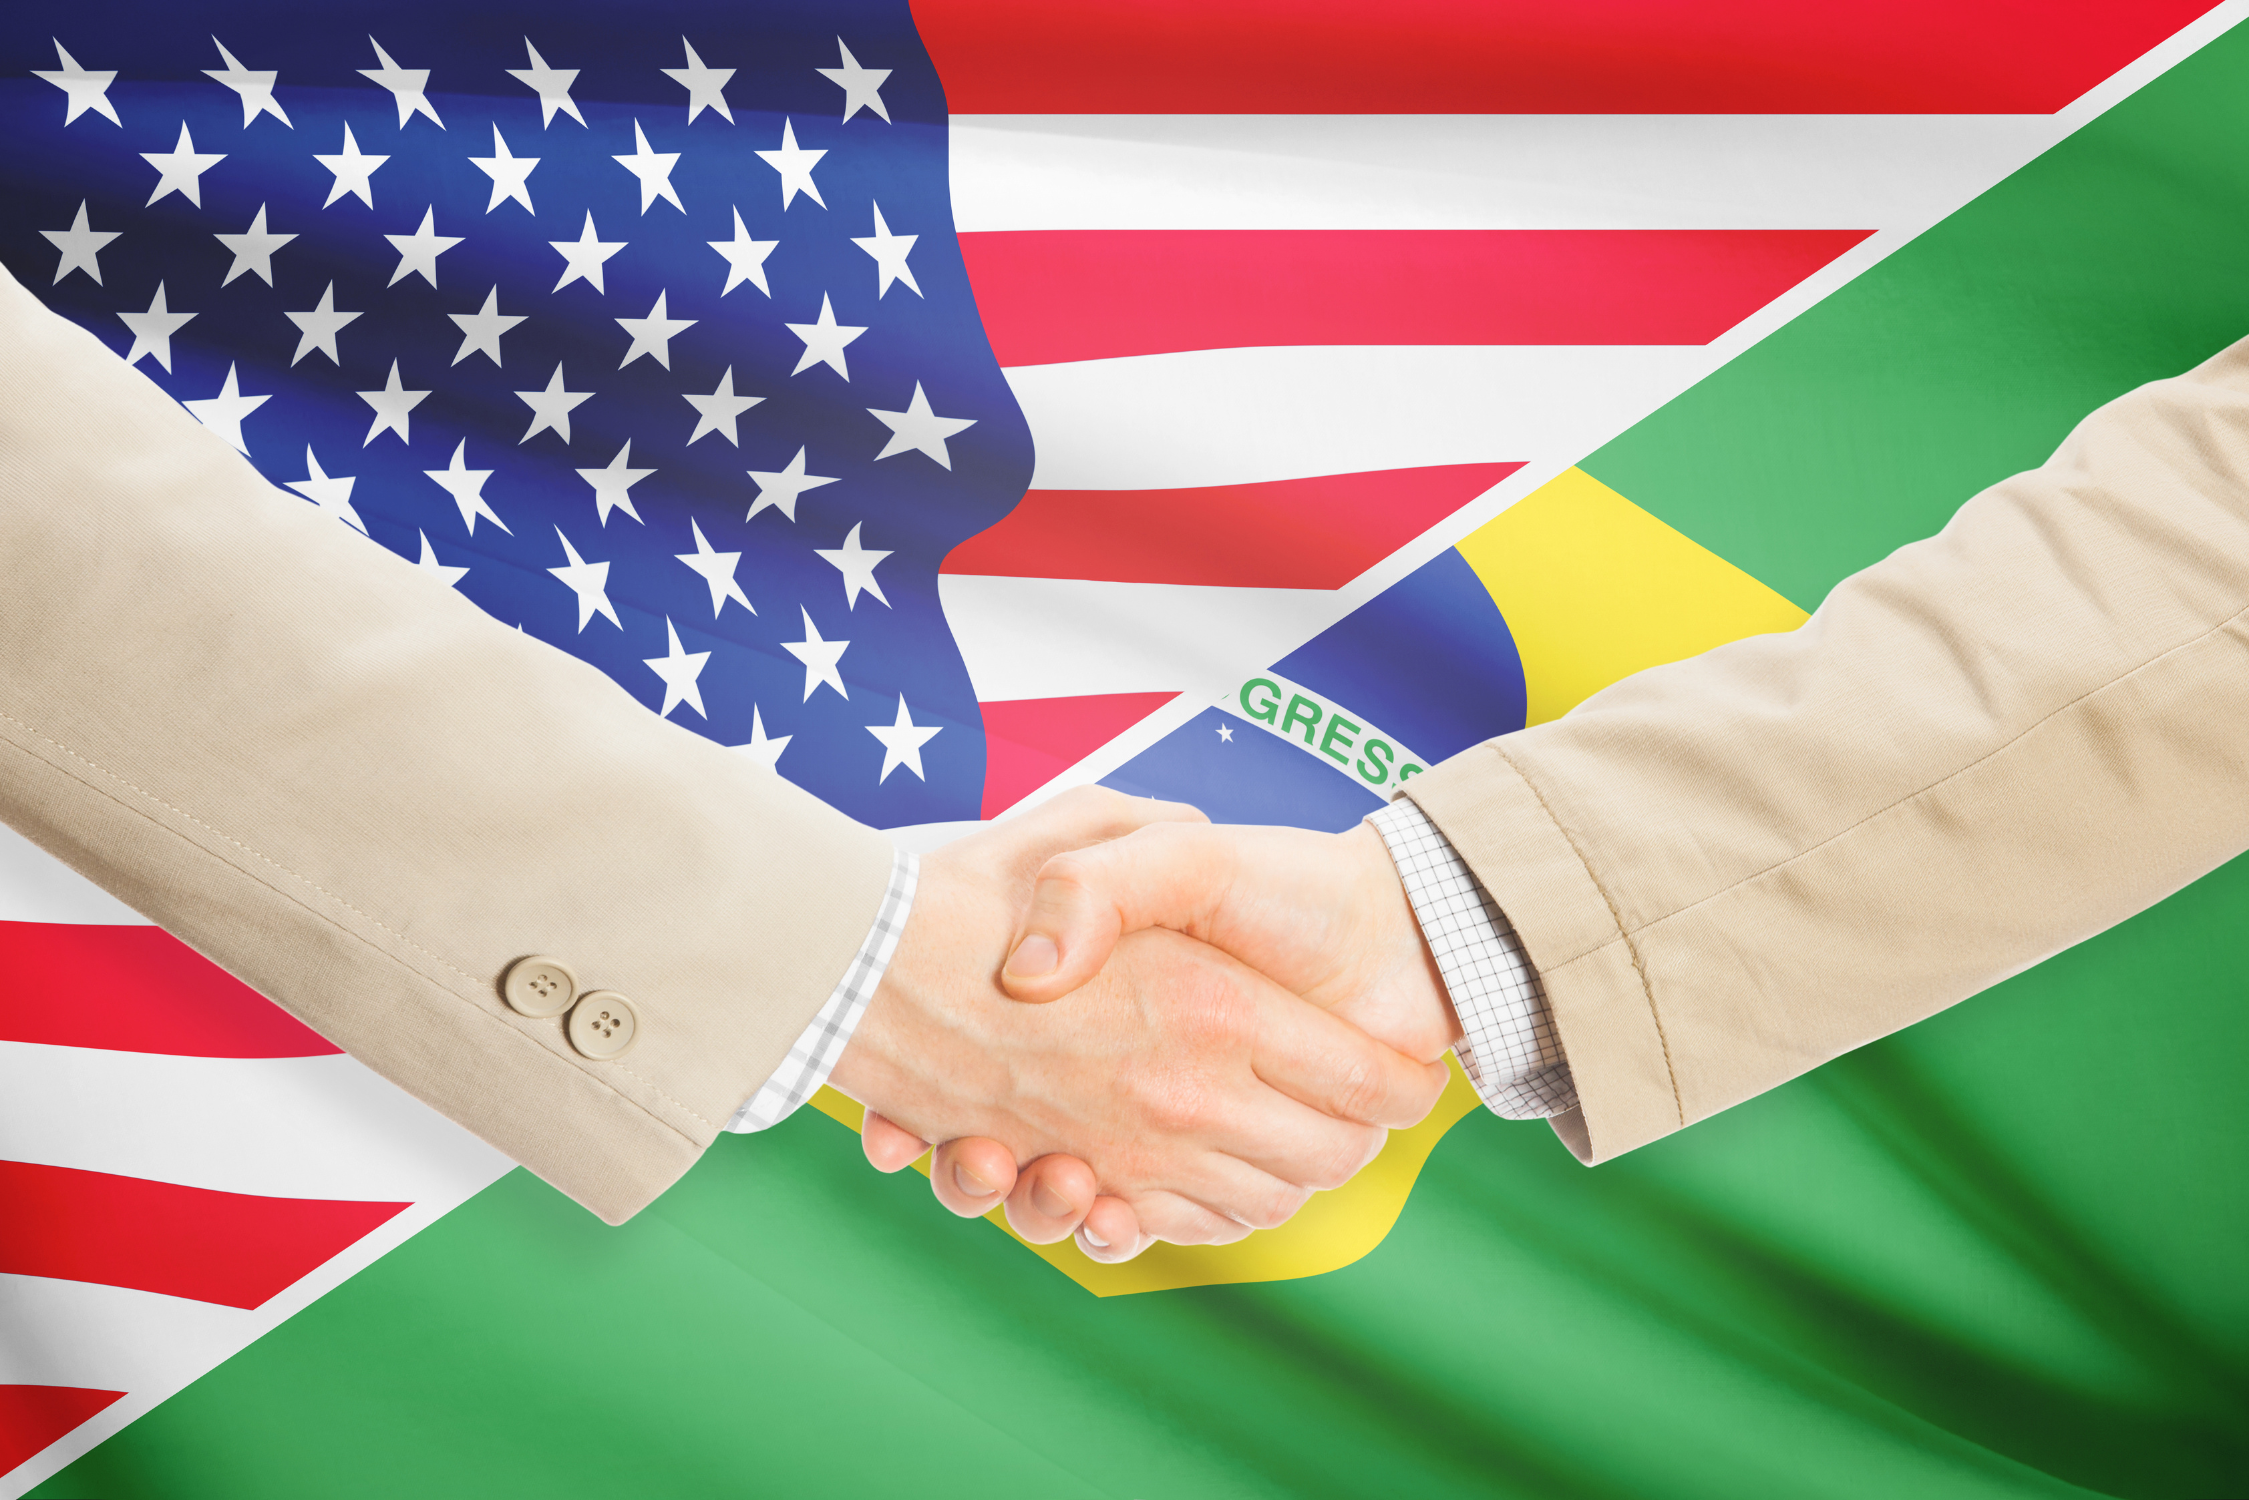 US Patent Prosecution Firms Sending Most Patent Cases to Brazil